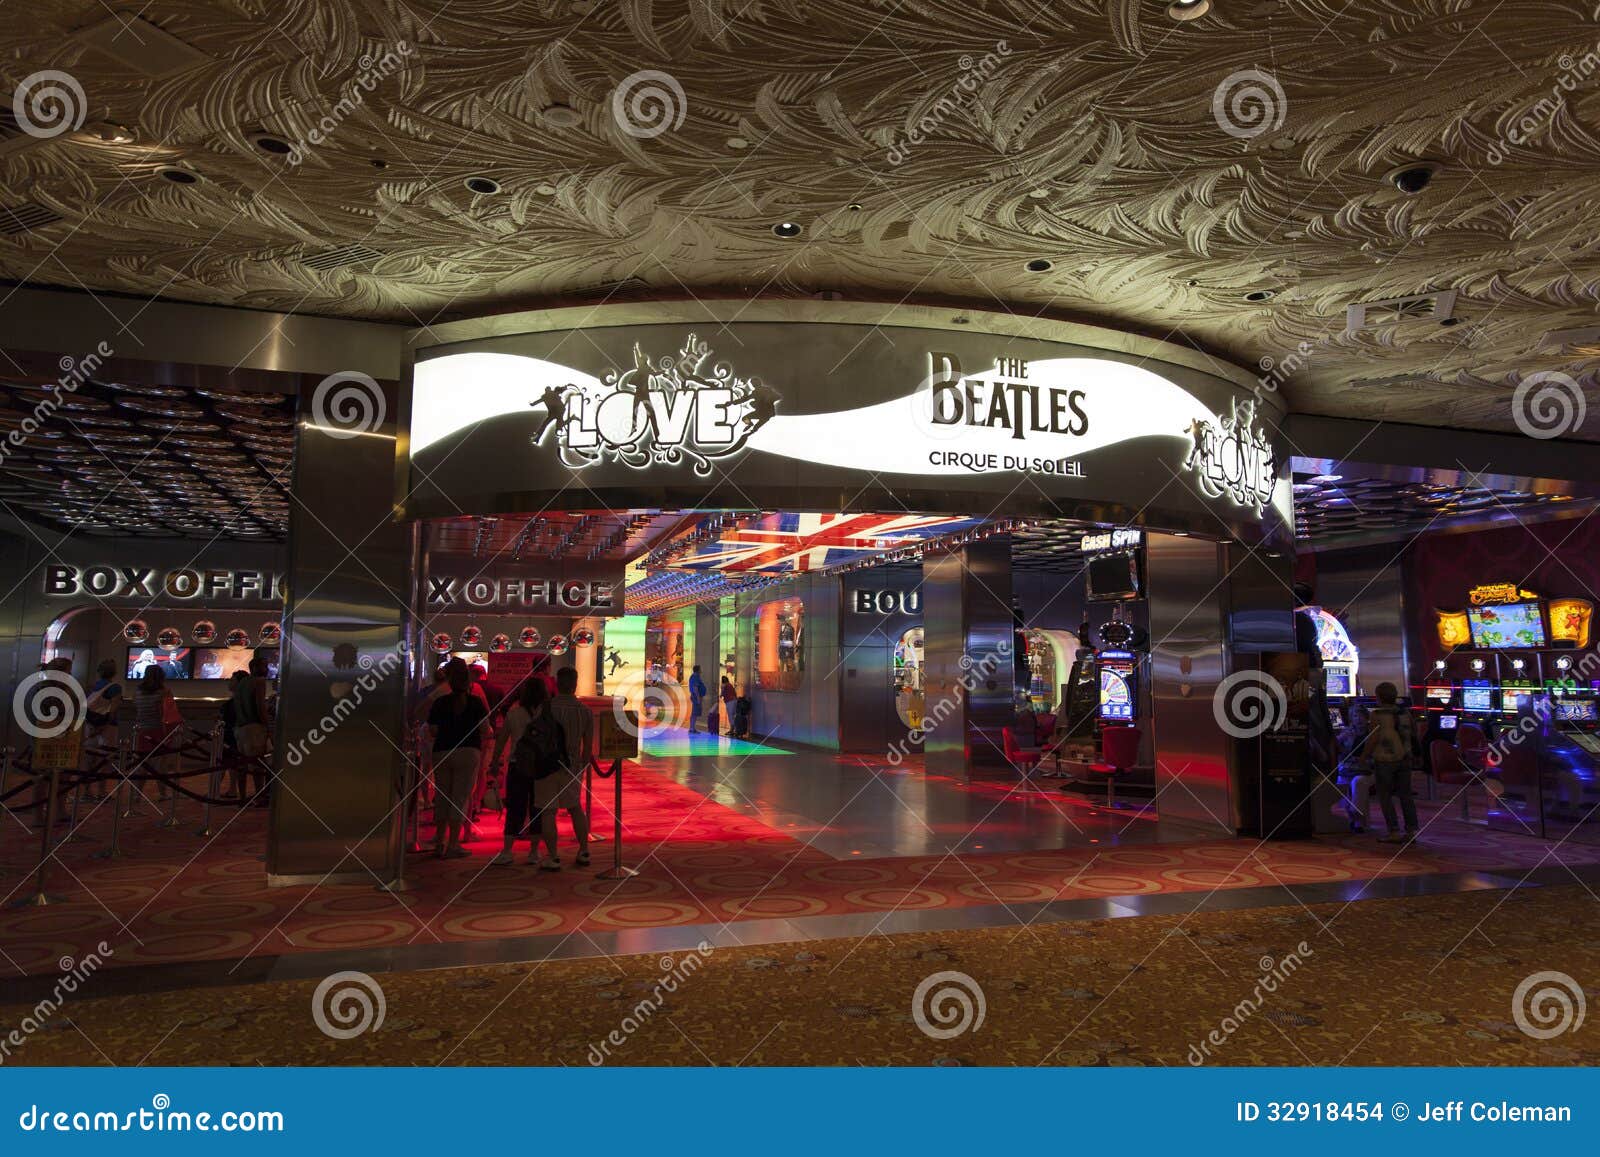 Beatles Love Show Entrance At The Mirage In Las Vegas Nv On Aug